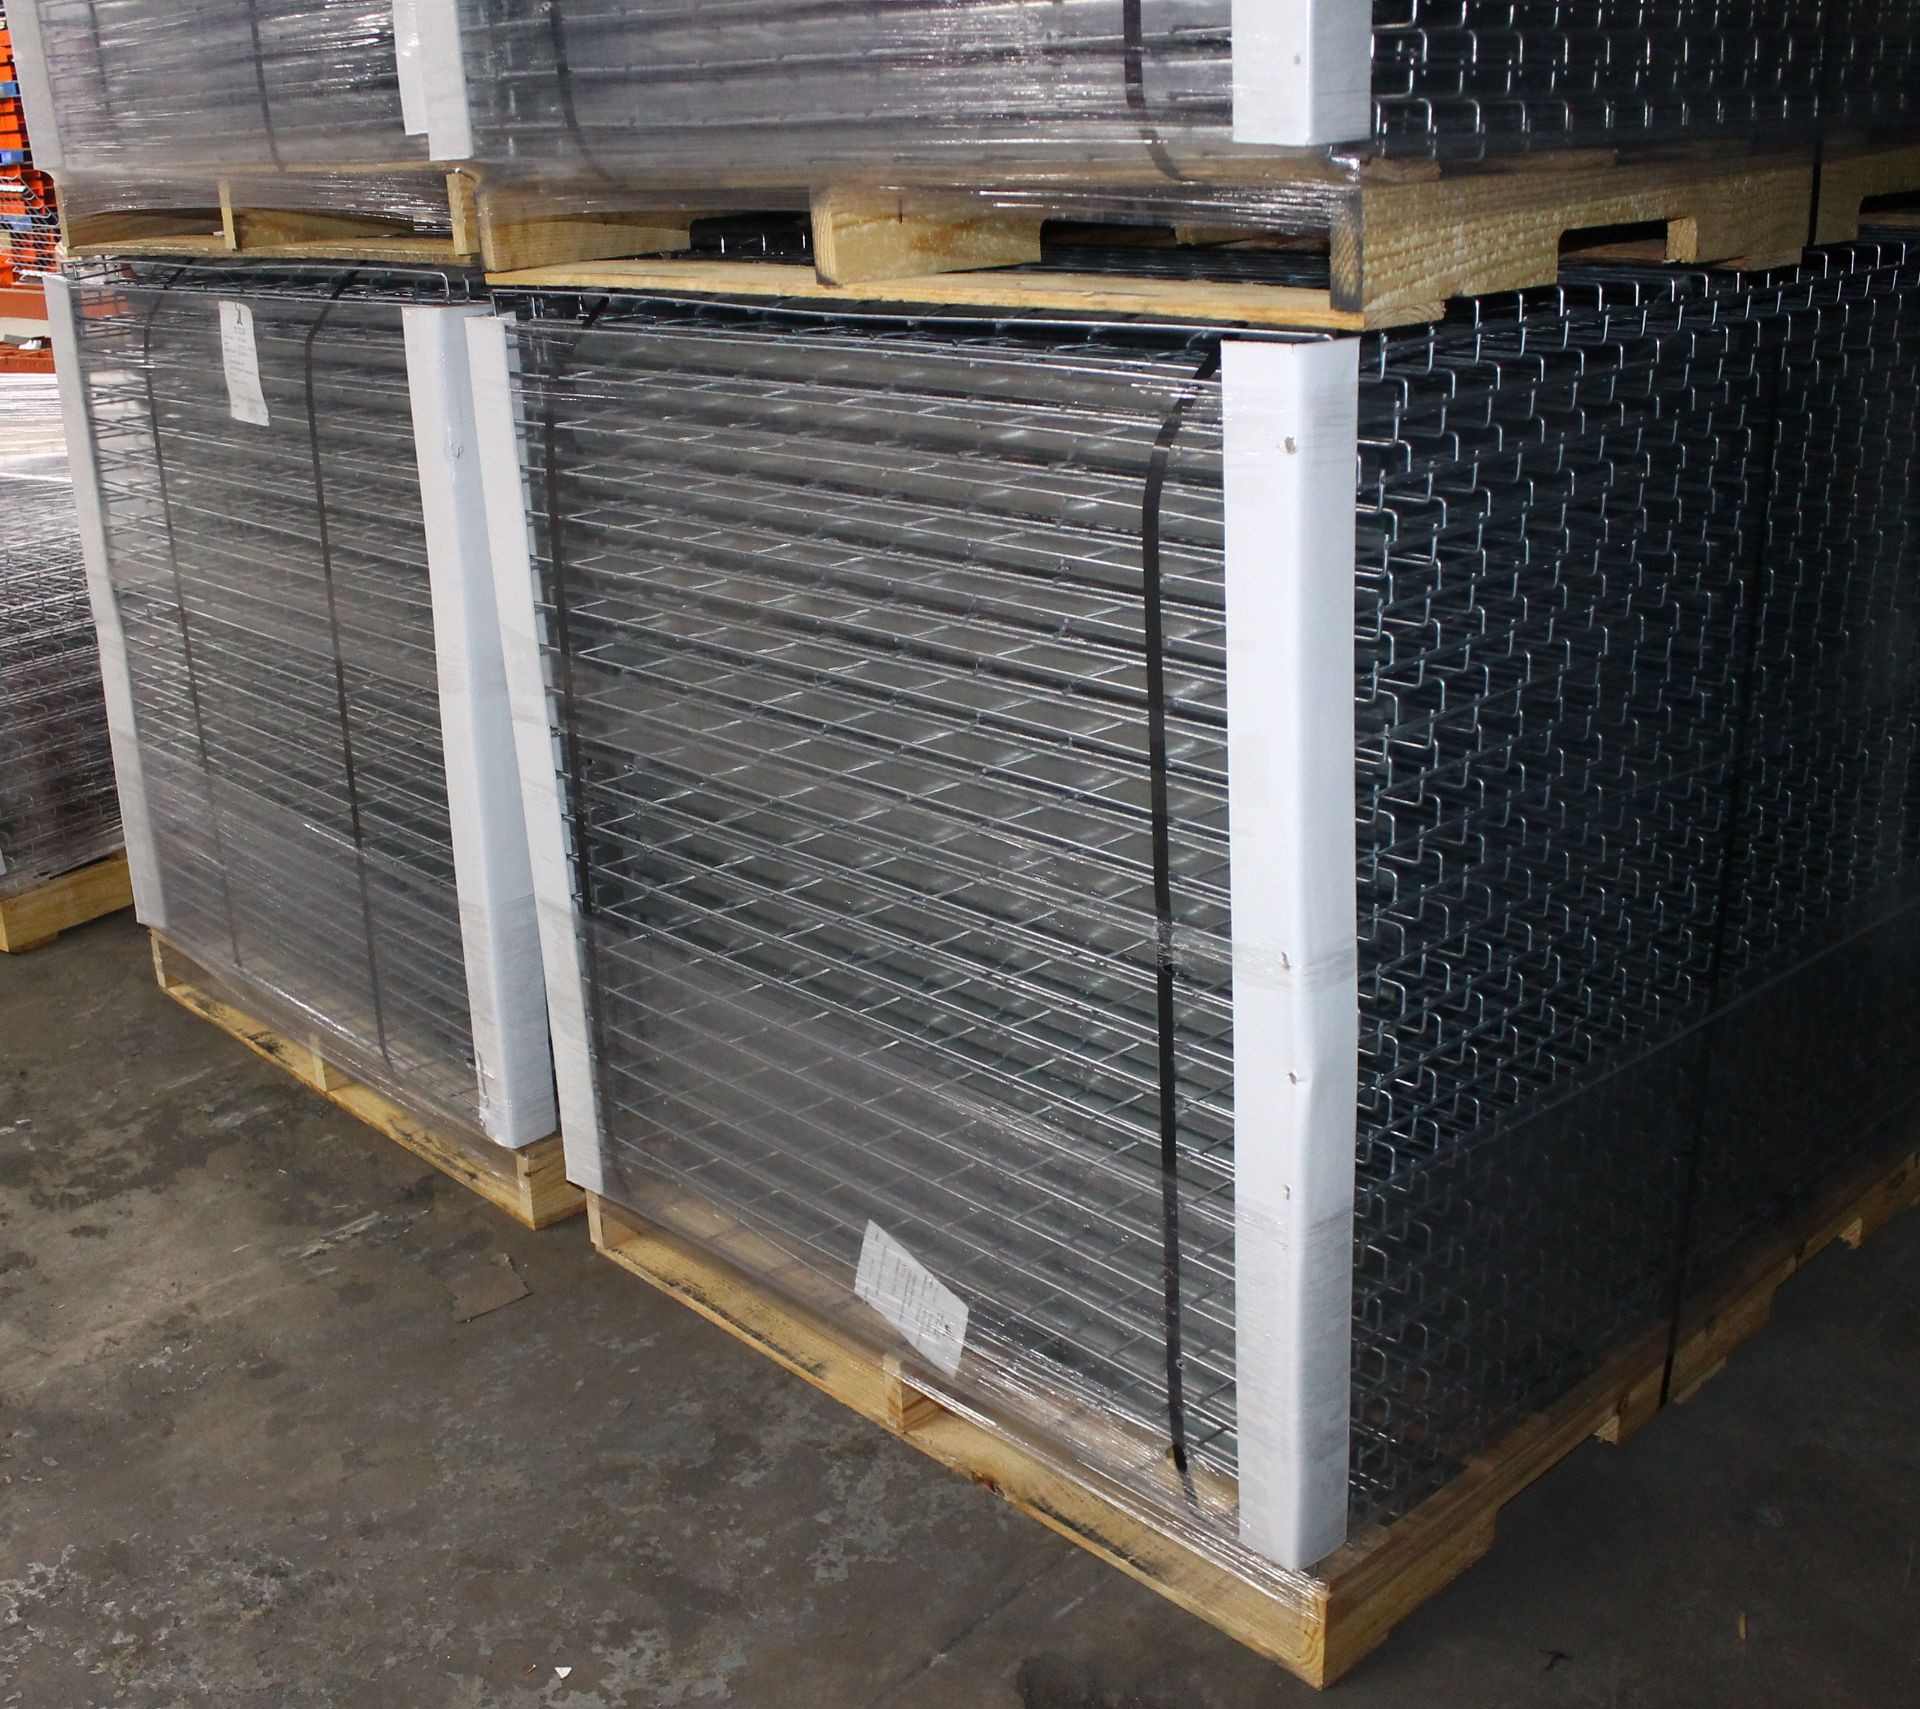 NEW 120 PCS OF STANDARD 42" X 52" WIREDECK - 2250 LBS CAPACITY